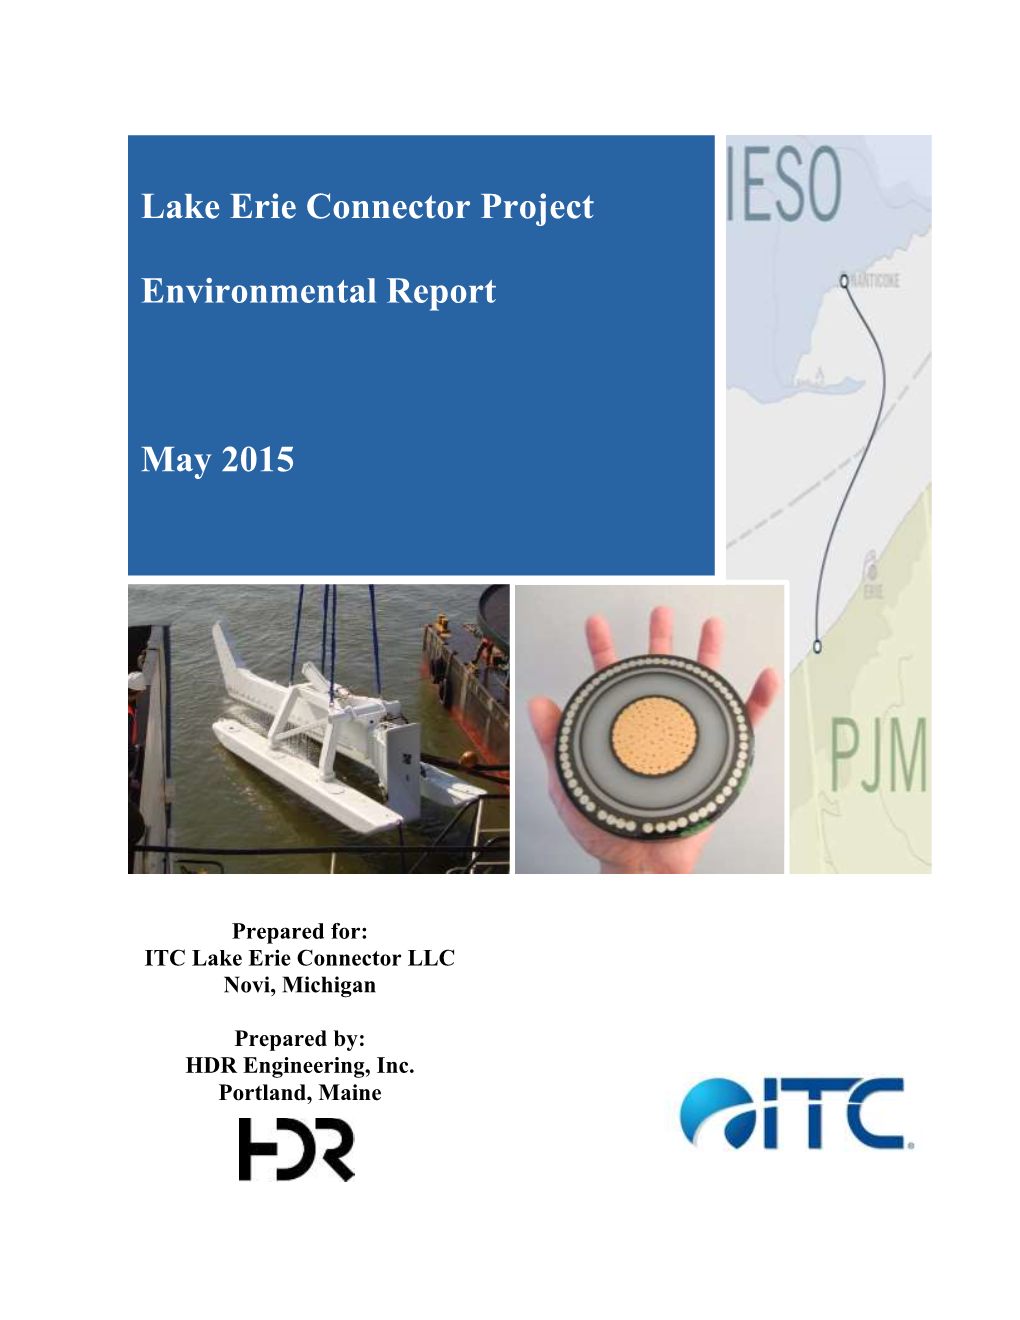 ITC Lake Erie Connector Environmental Report